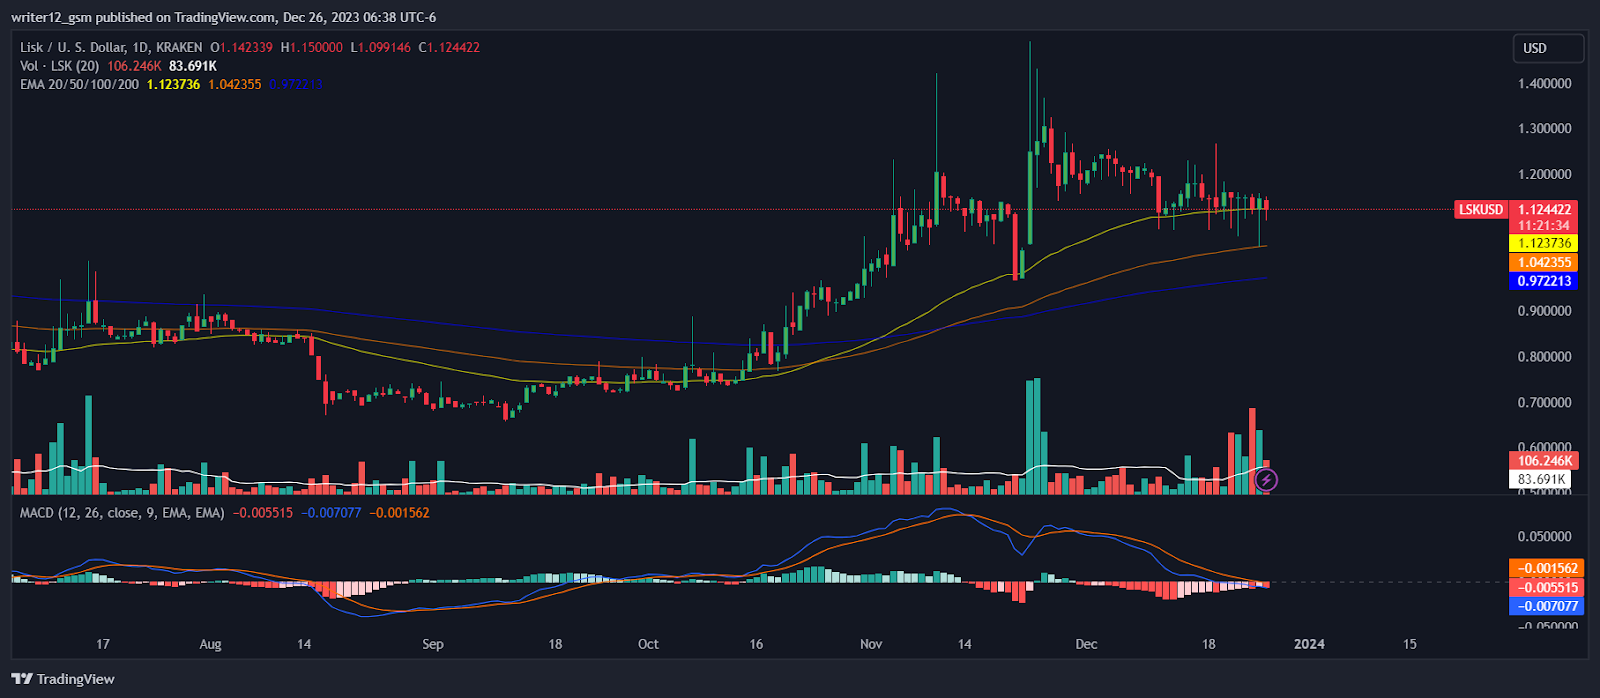 Lisk Crypto Price Prediction: Will LSK Sustain Above 200 EMA?